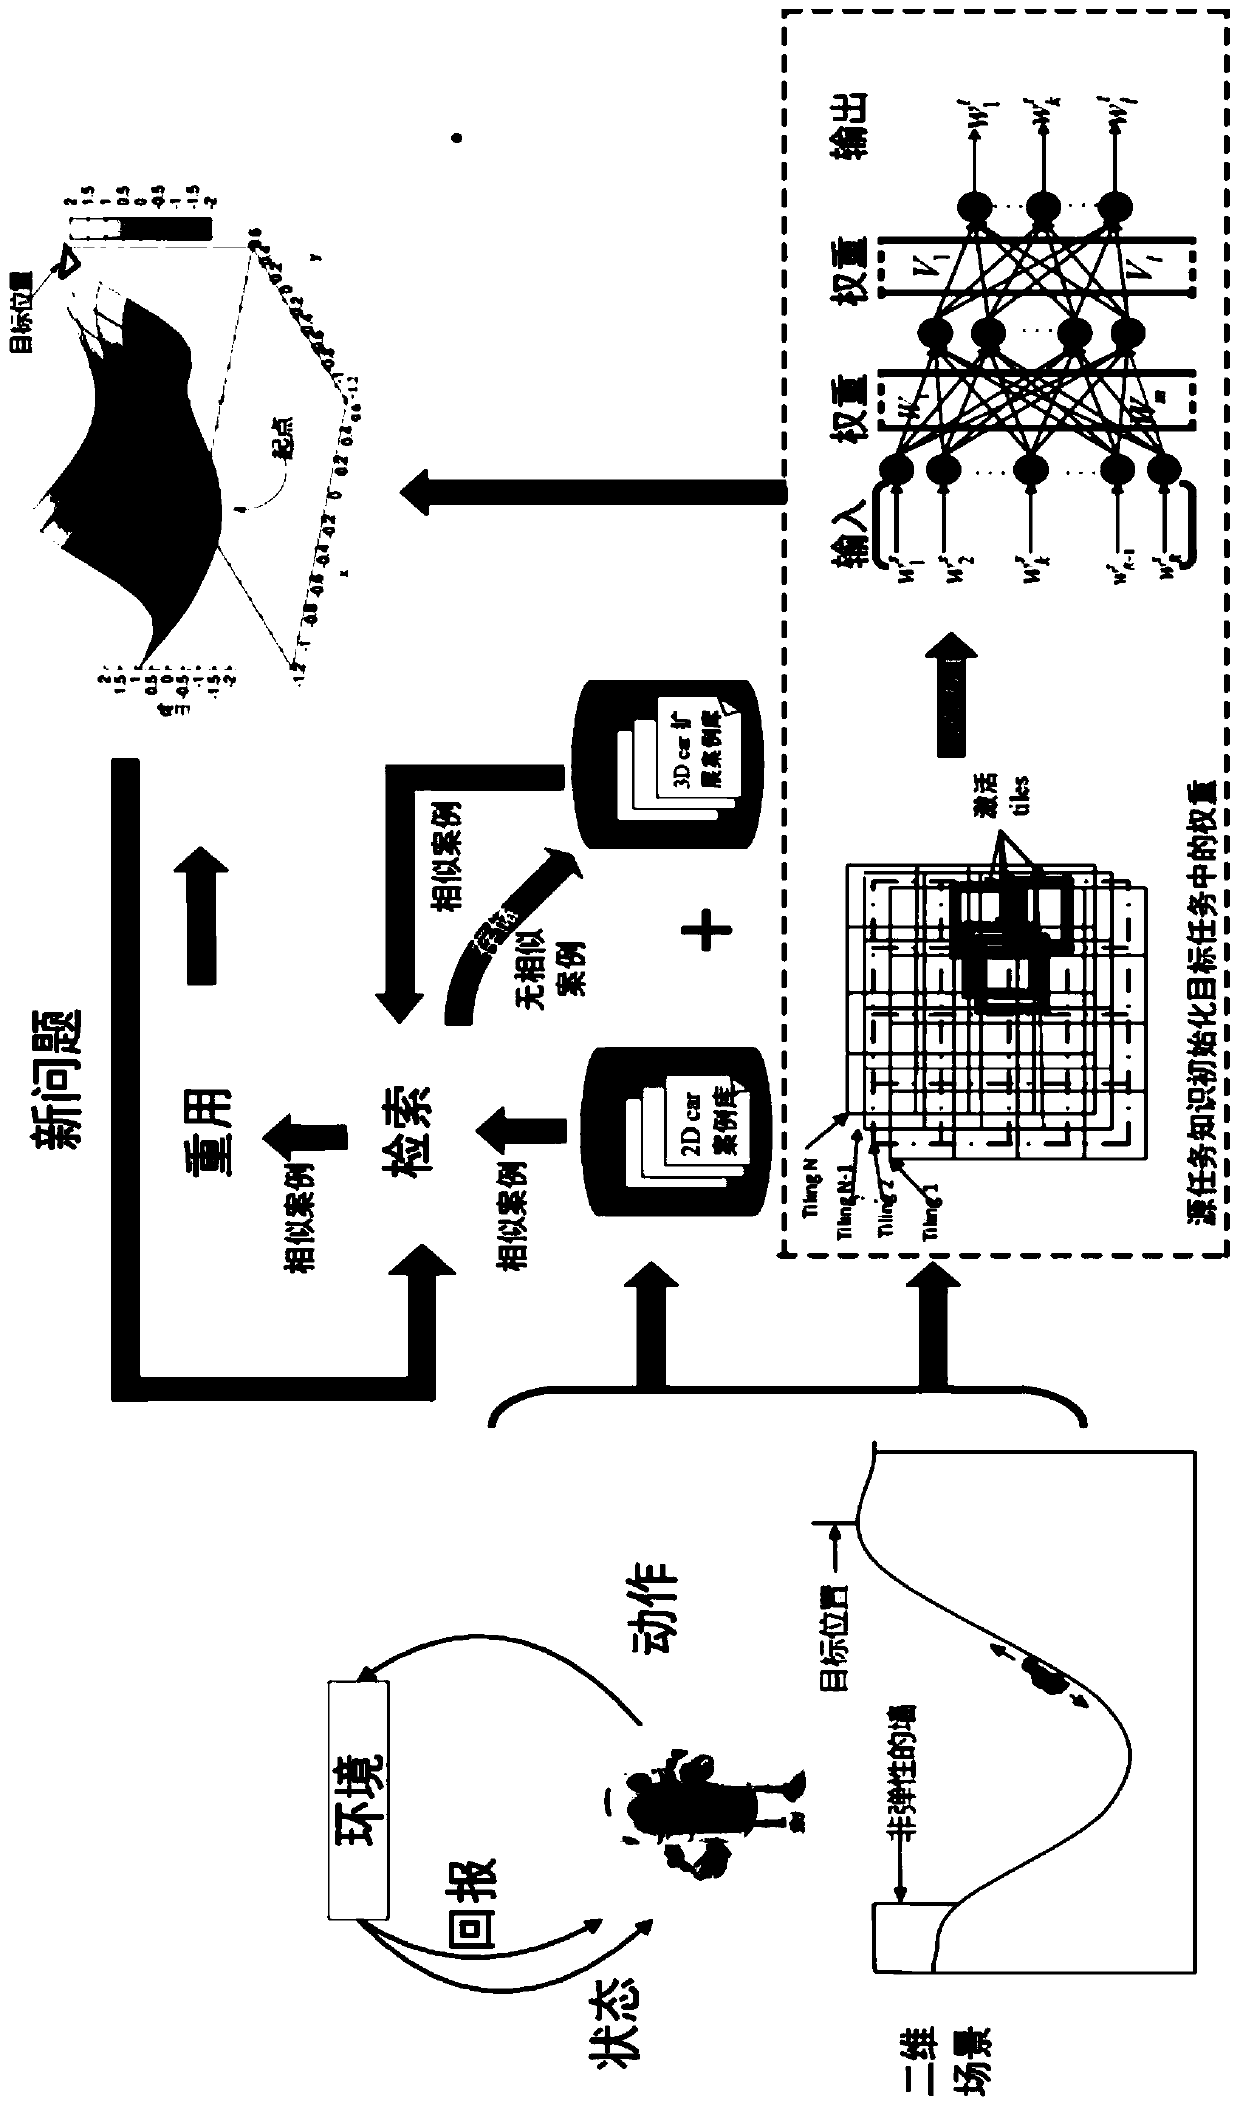 A knowledge transfer combined reinforcement learning method and a learning method applied to autonomous skills of an unmanned vehicle